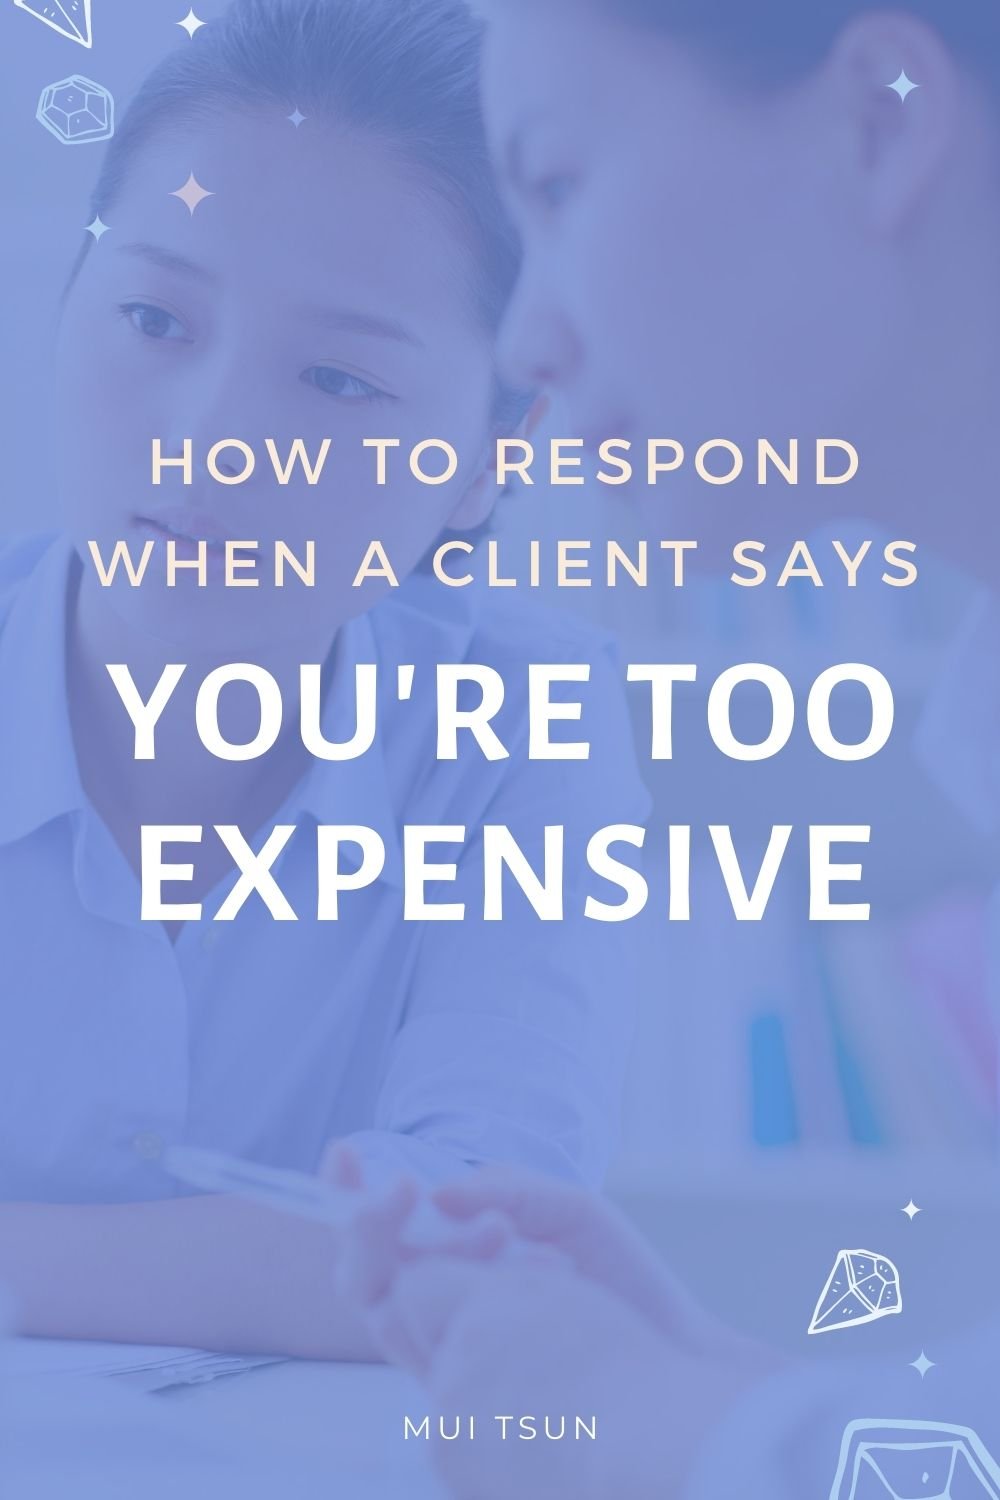 How to Respond When a Client Says You're too expensive!